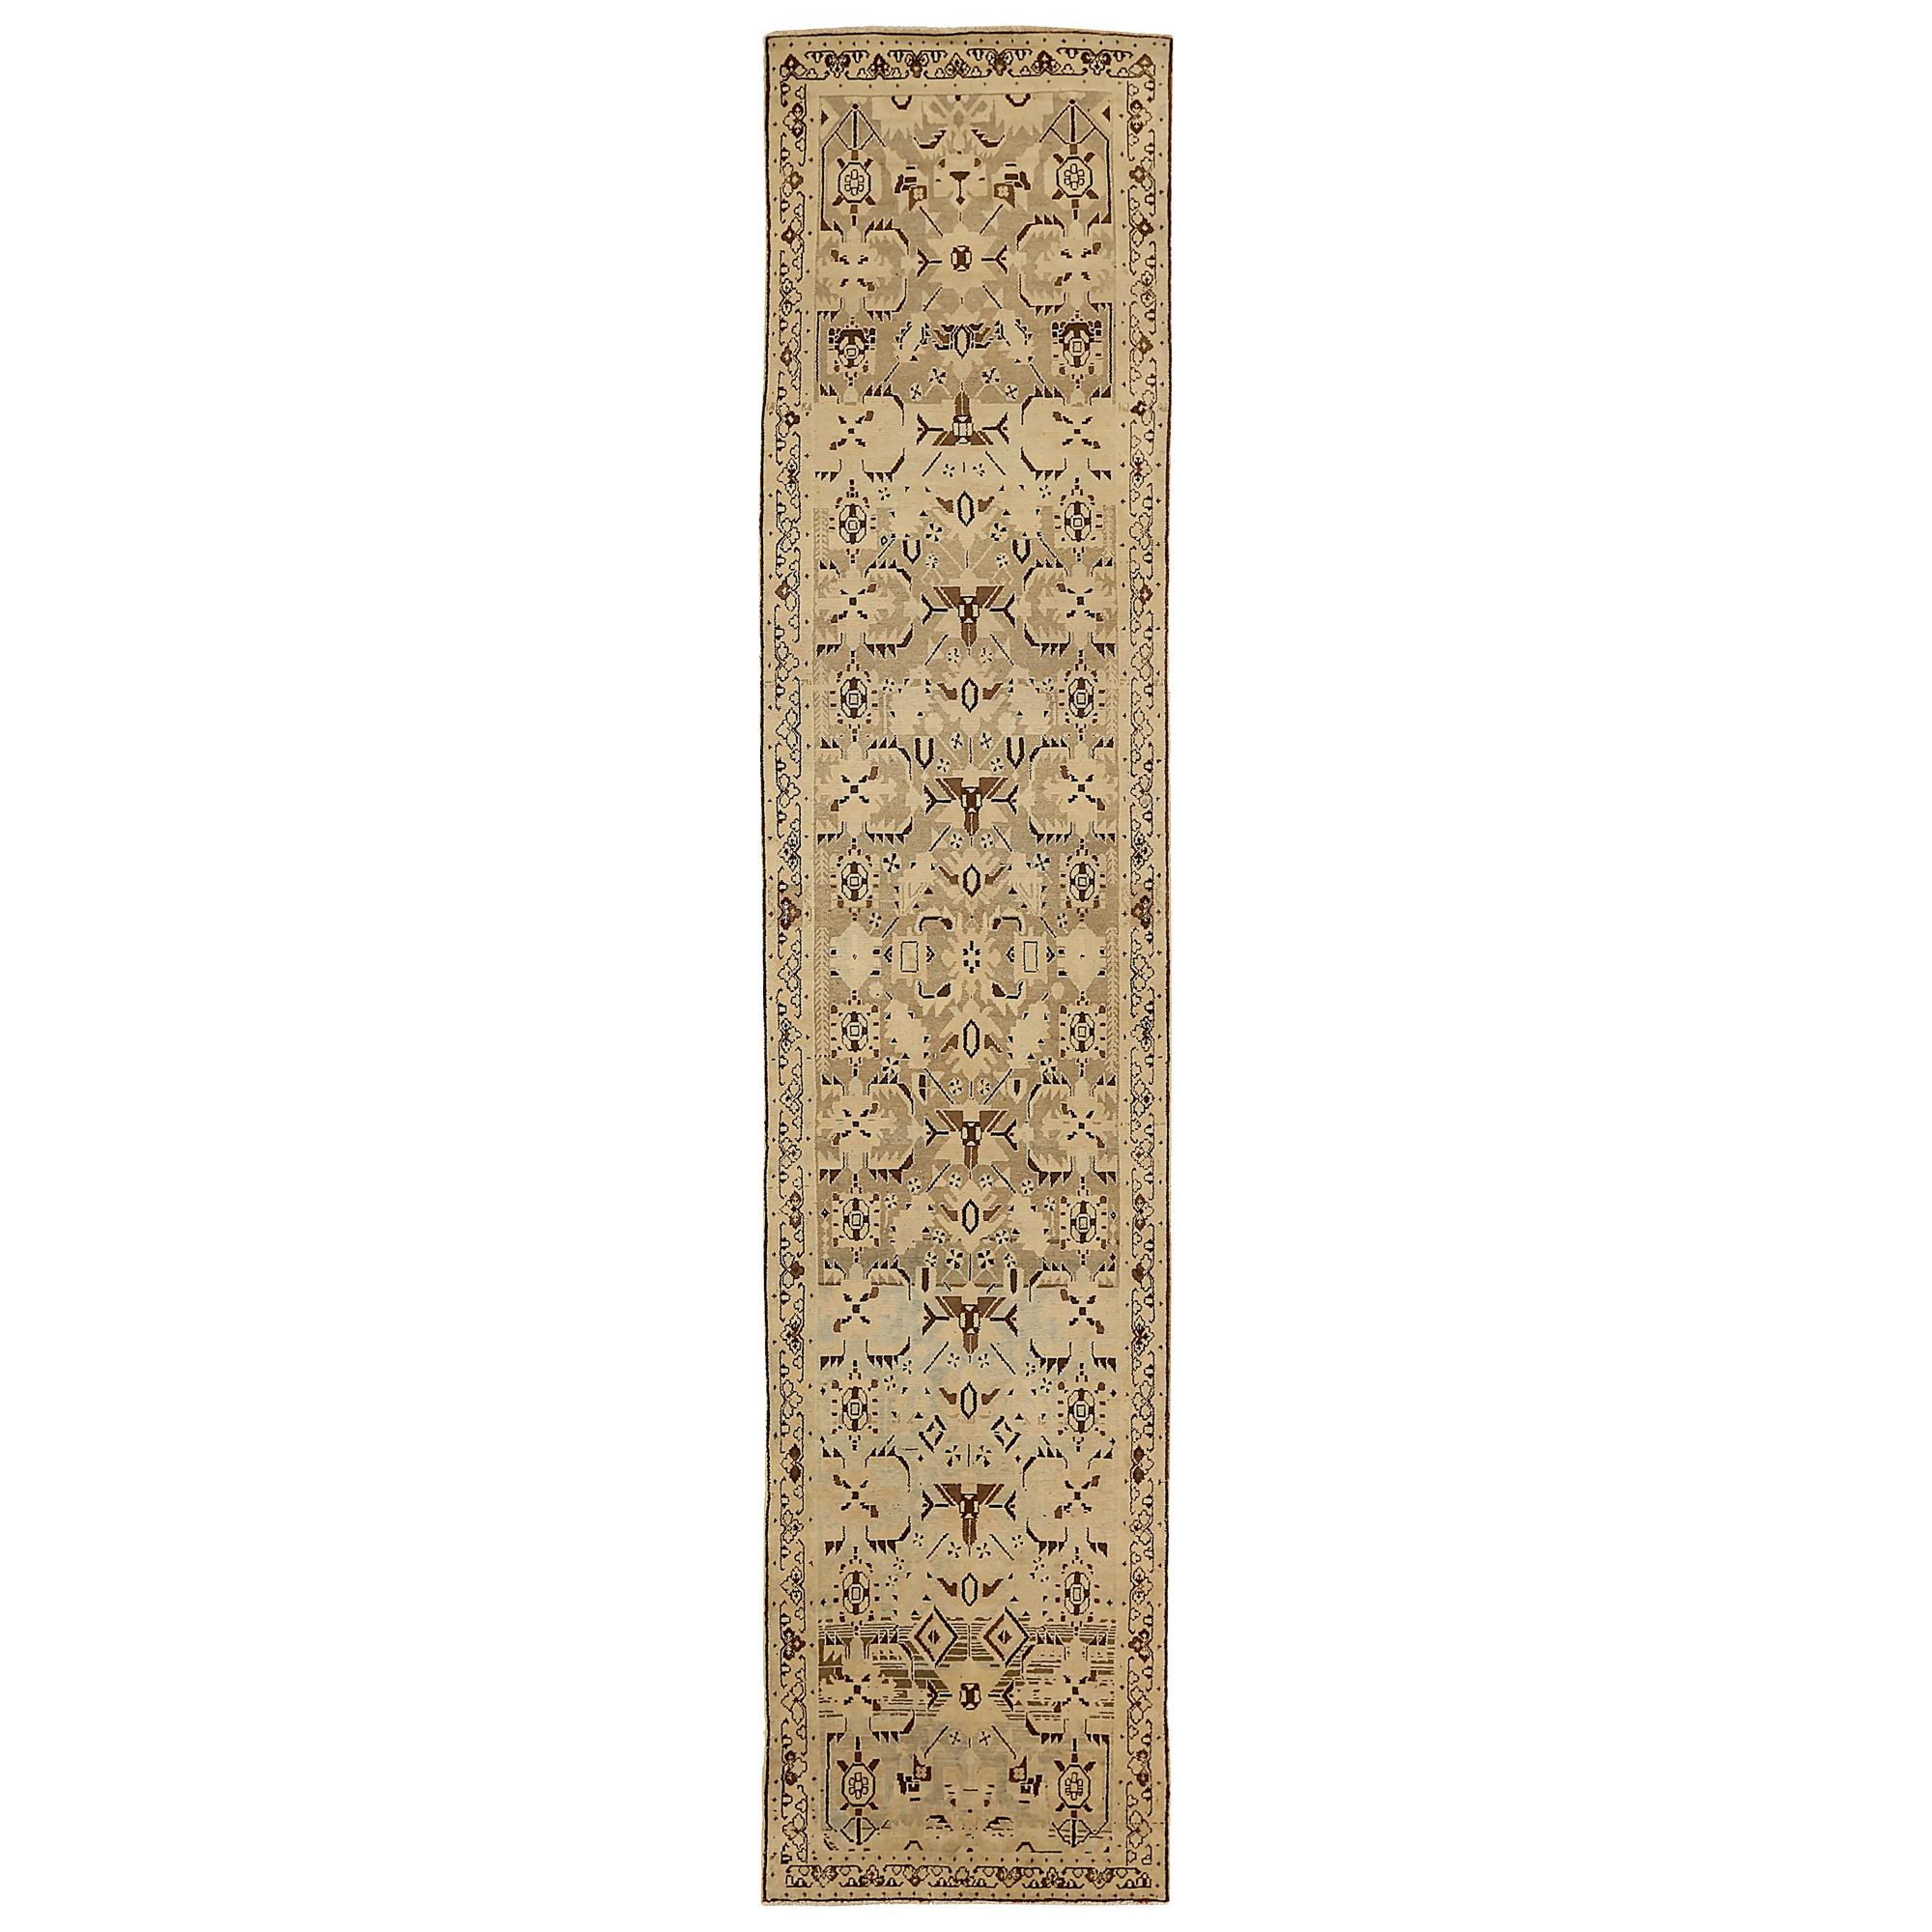 Antique Persian Malayer Runner Rug with Tribal Design in Beige Field